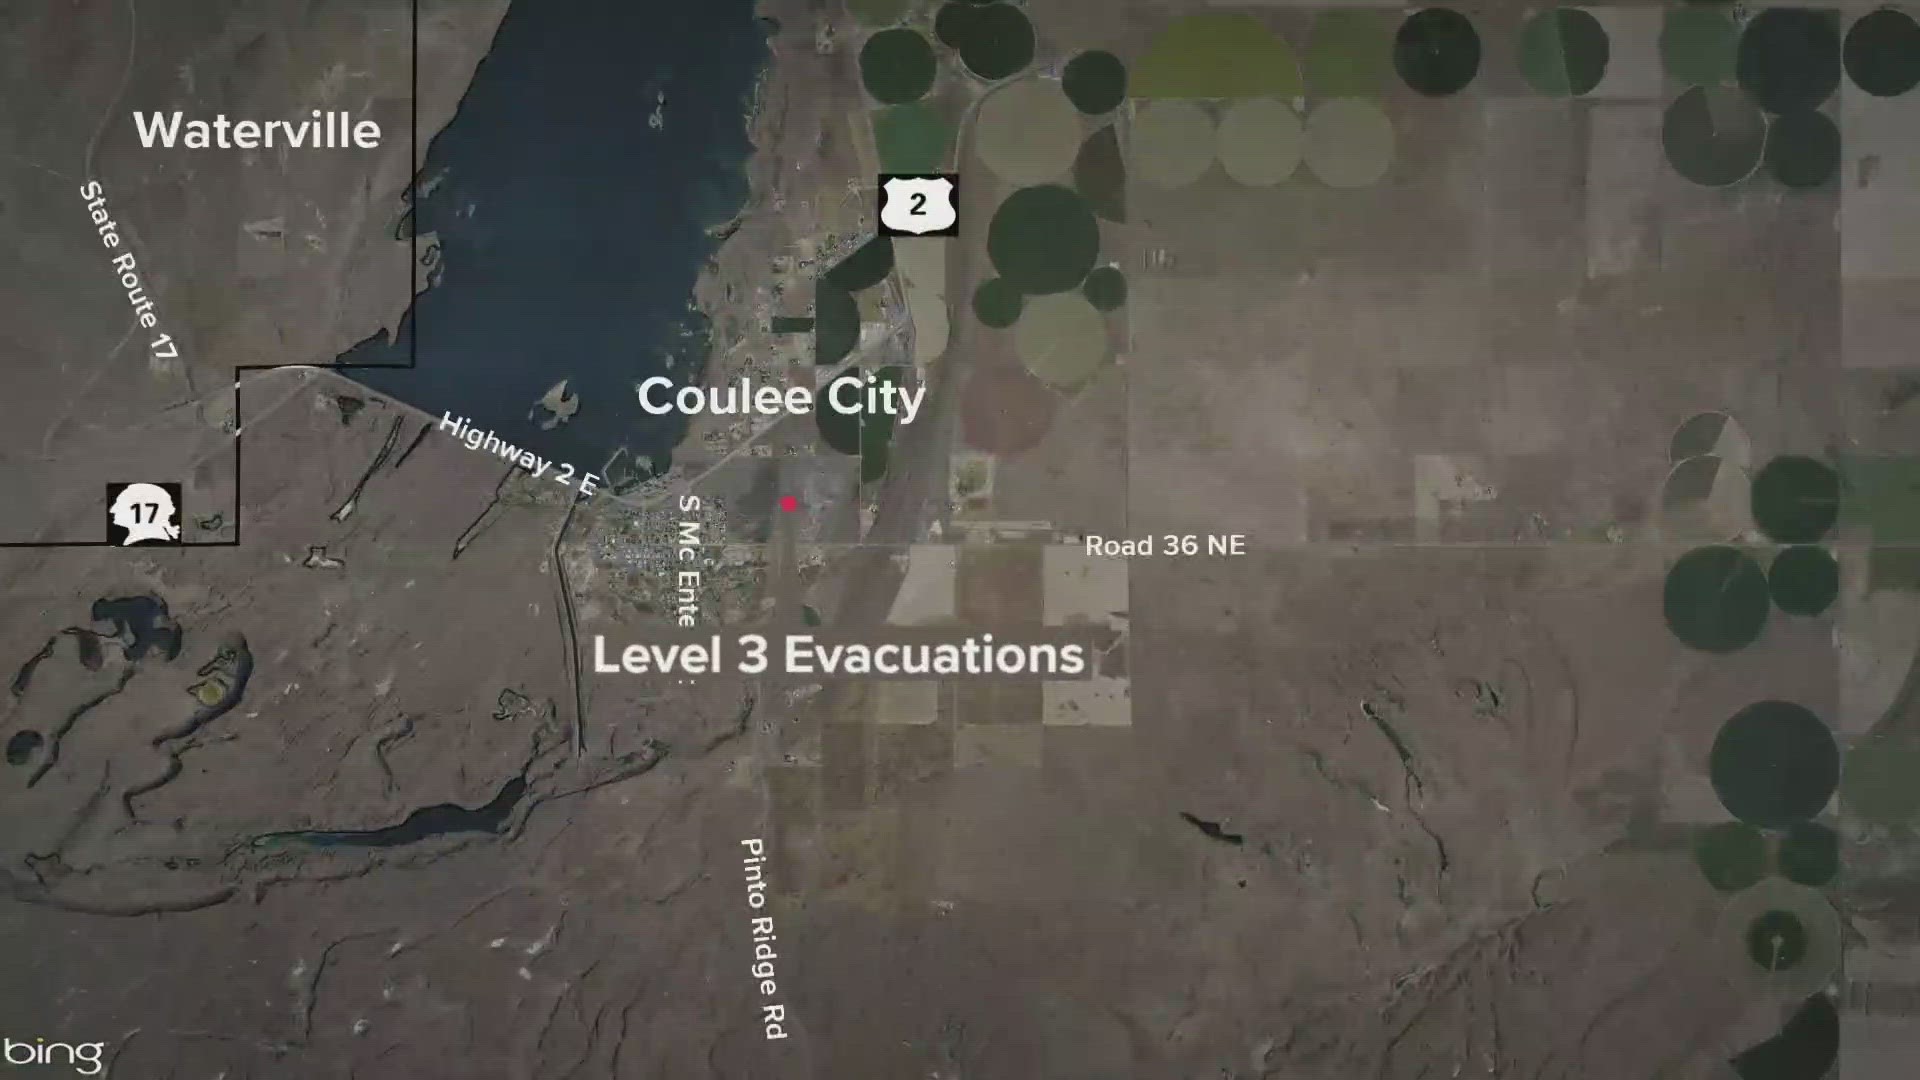 Grant County Sheriffs have issued a Level 3 evacuation for the area near Road 36 and Road I8 near Coulee City.